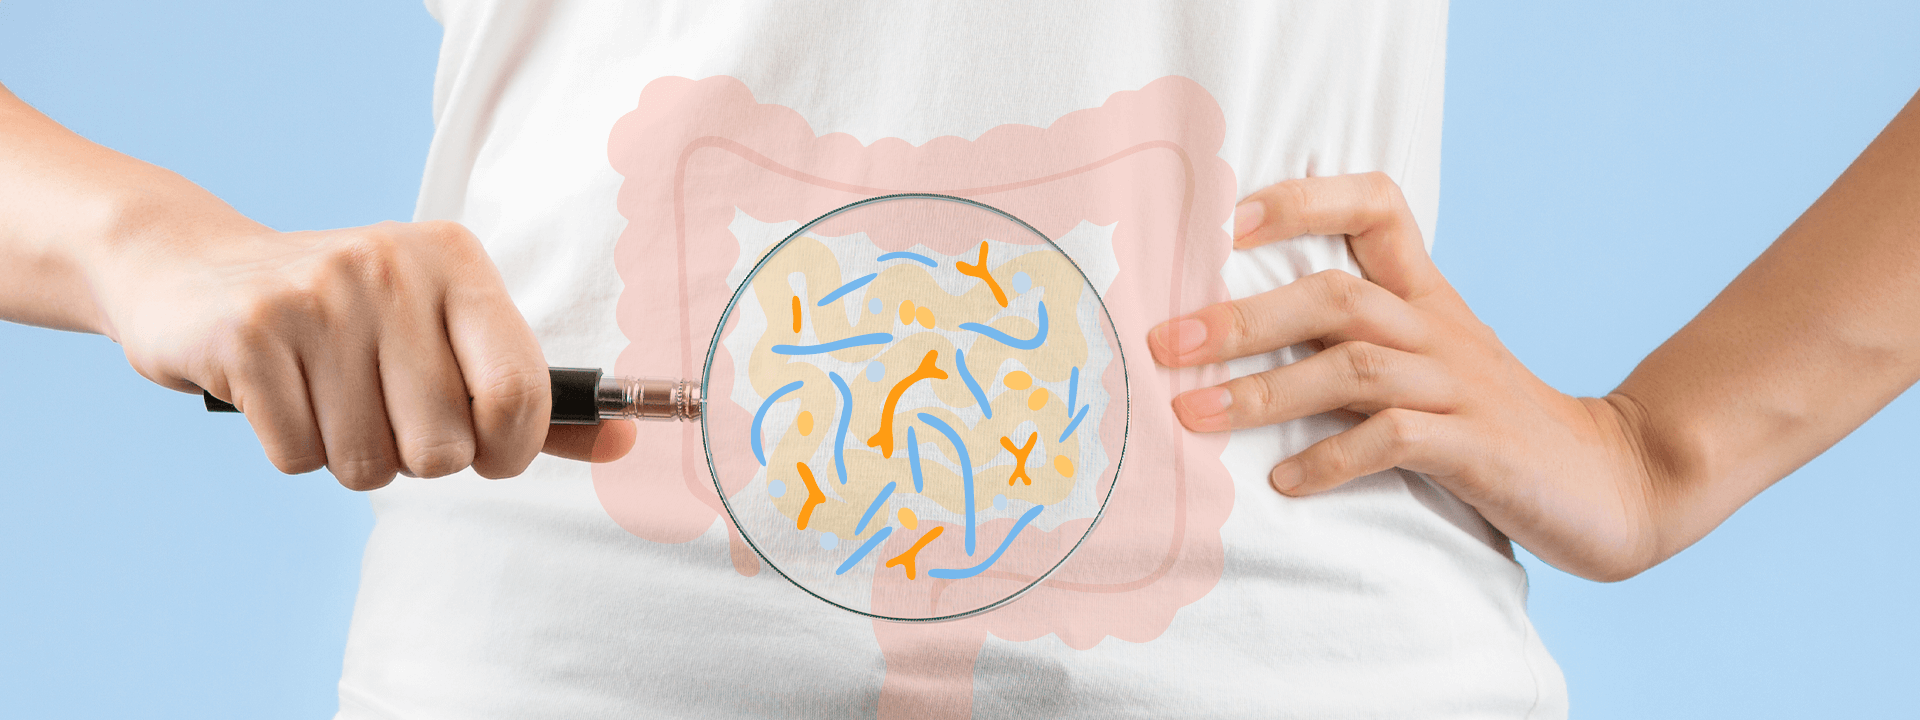 How Your Microbiome Shapes Your Health